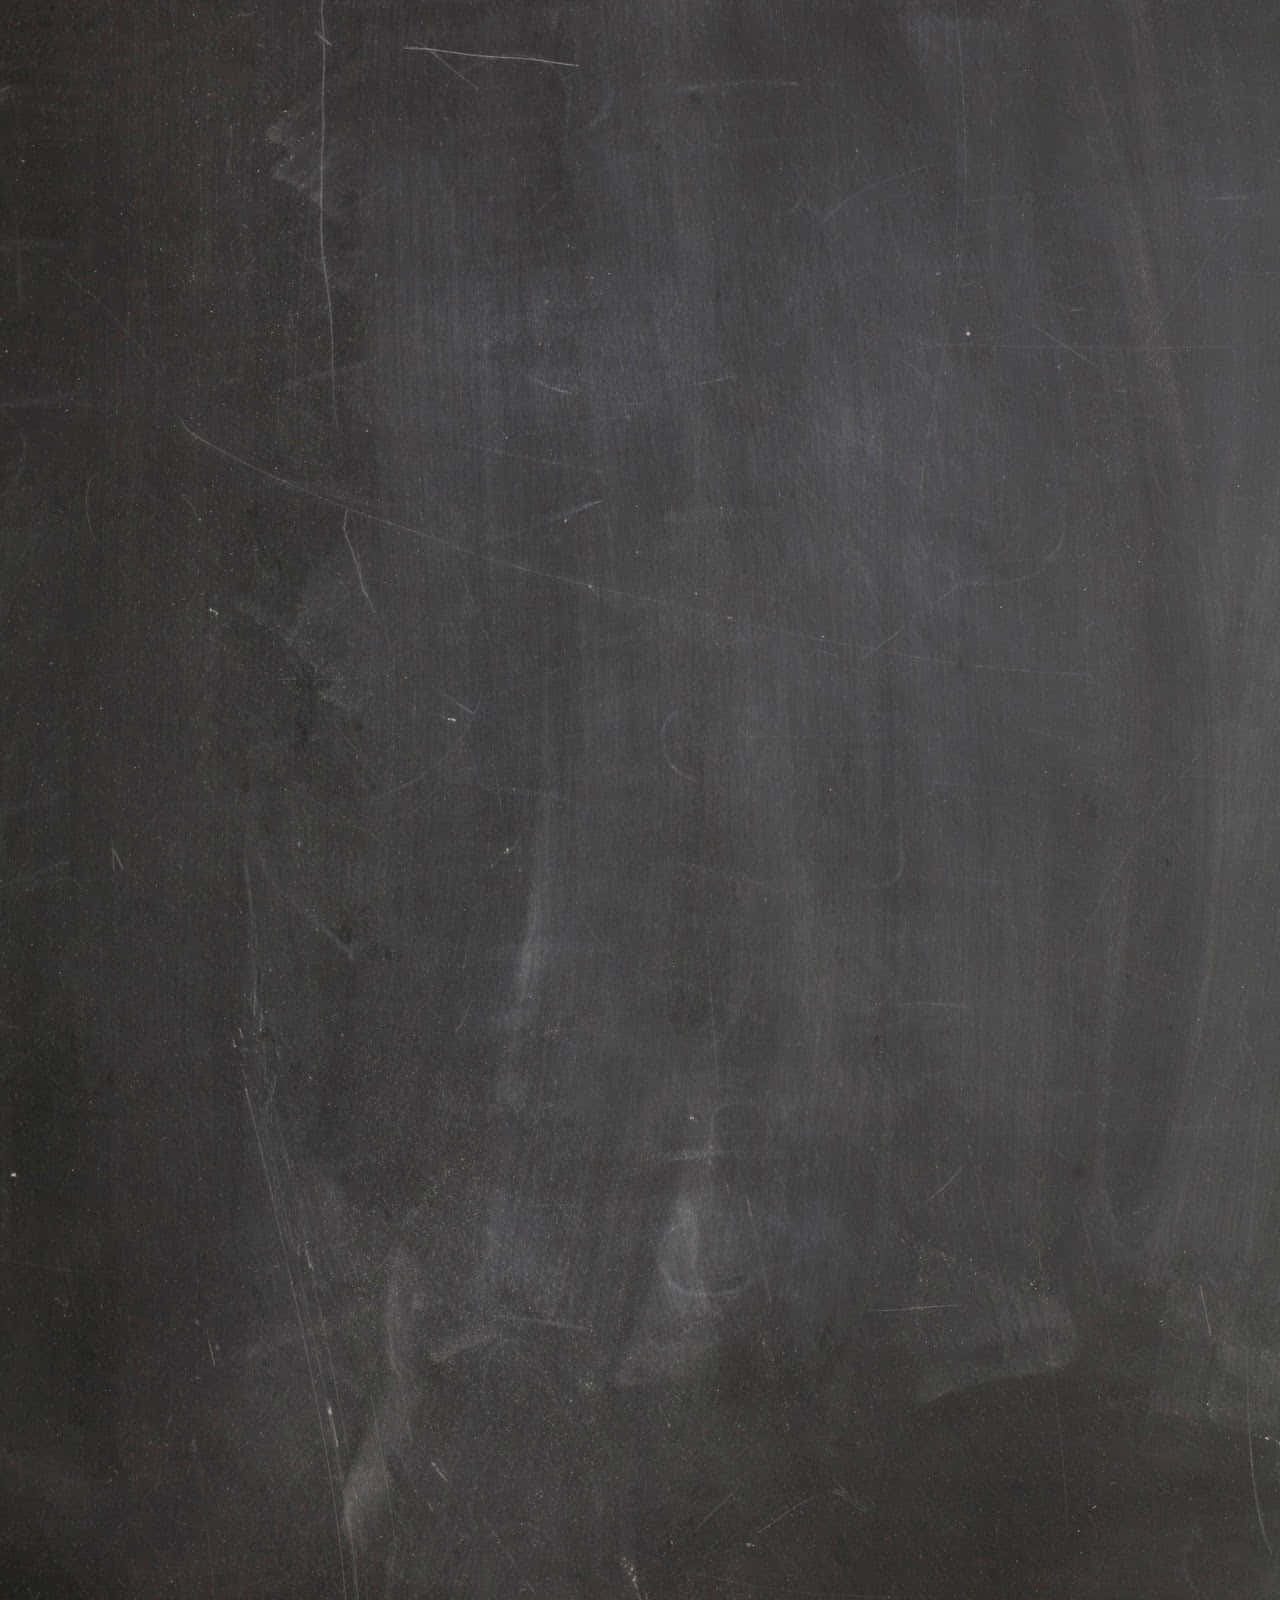 A chalkboard background with woodgrain detailing